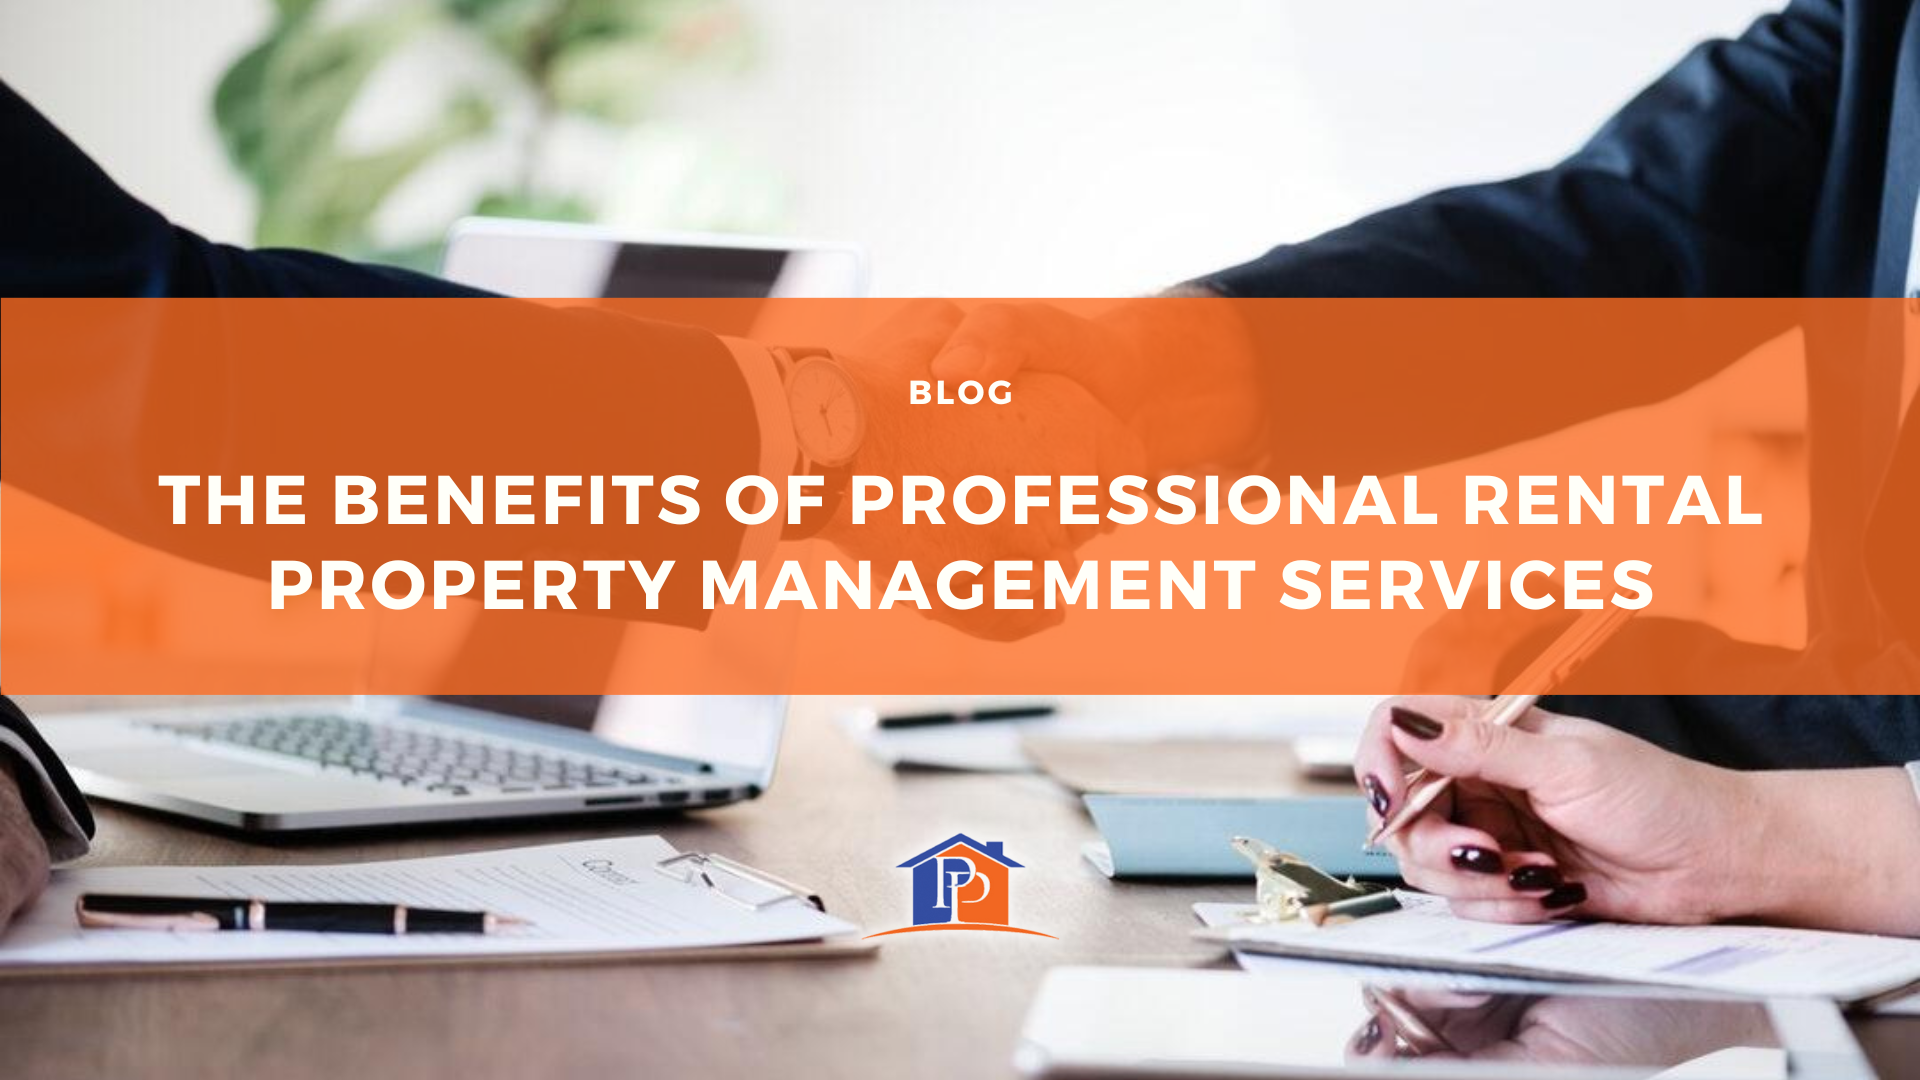 The Benefits of Professional Rental Property Management Services